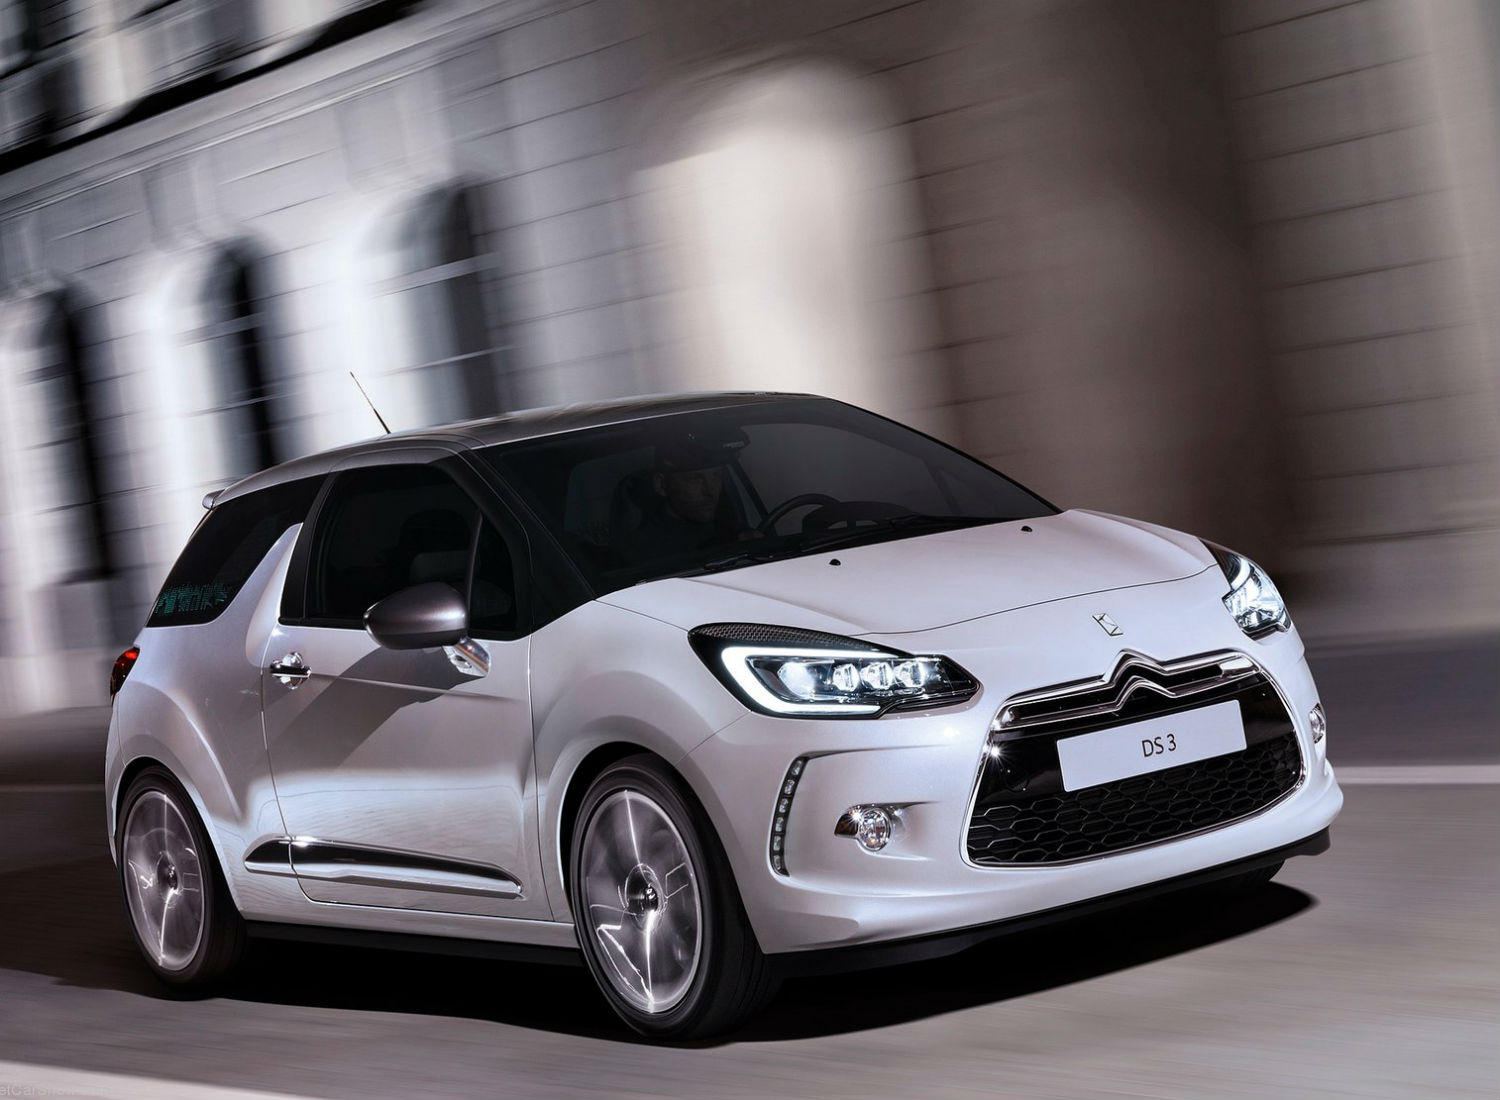 Coches para mujeres - Citroën DS3